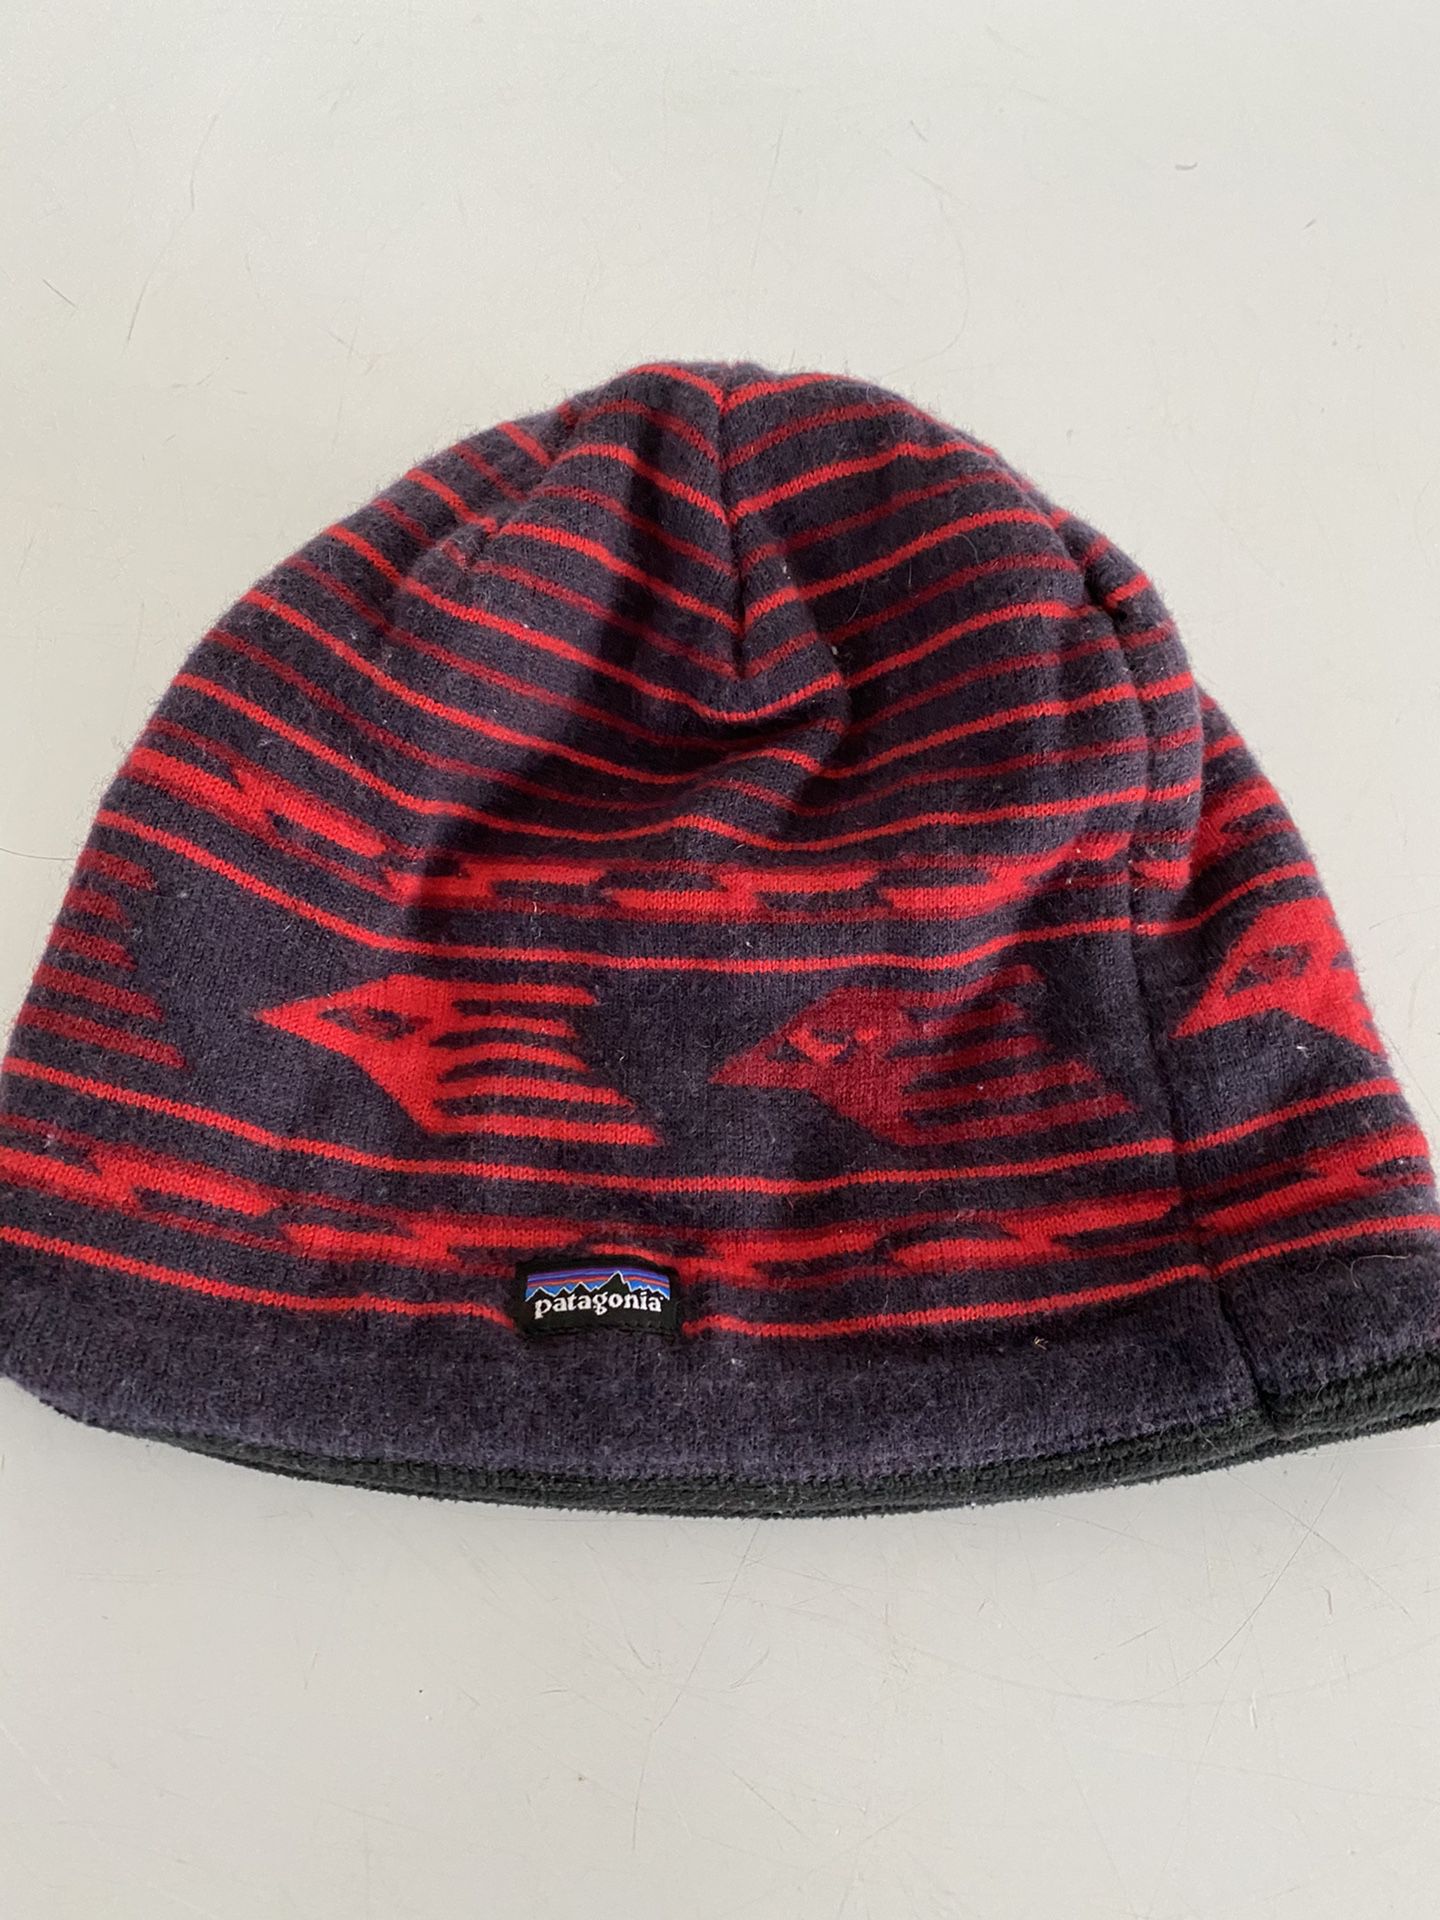 Patagonia hat, size small